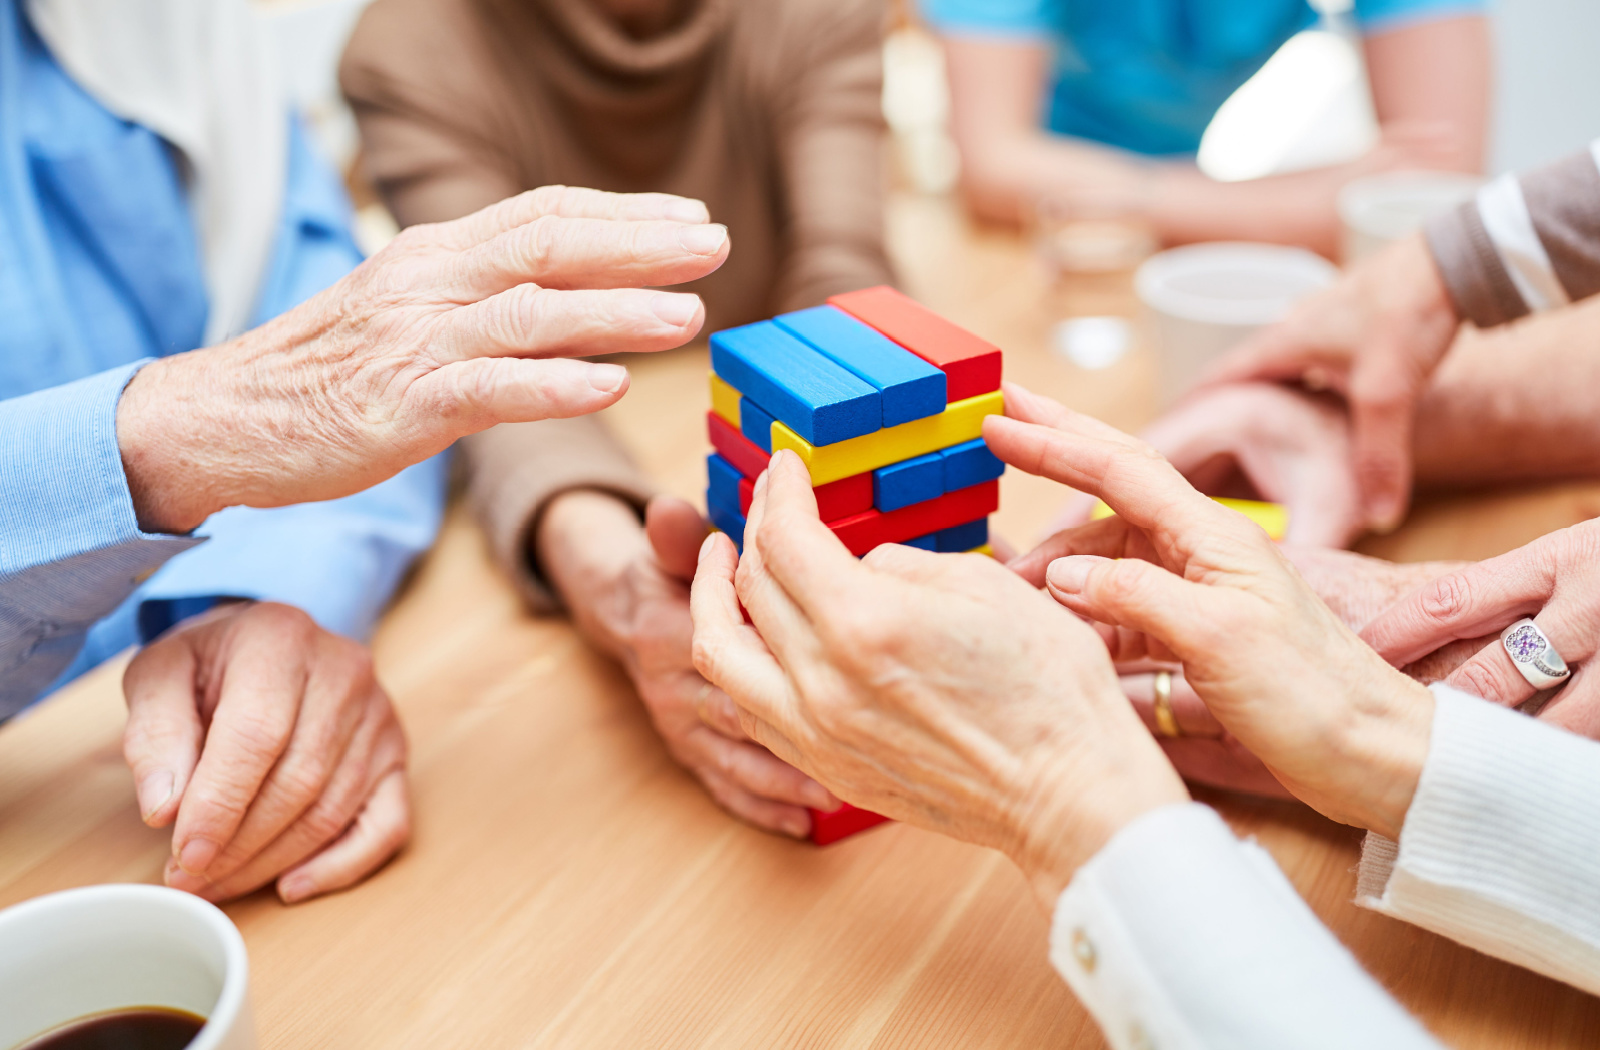 Image of a group of seniors' hands playing with coloured Jenga blocks.